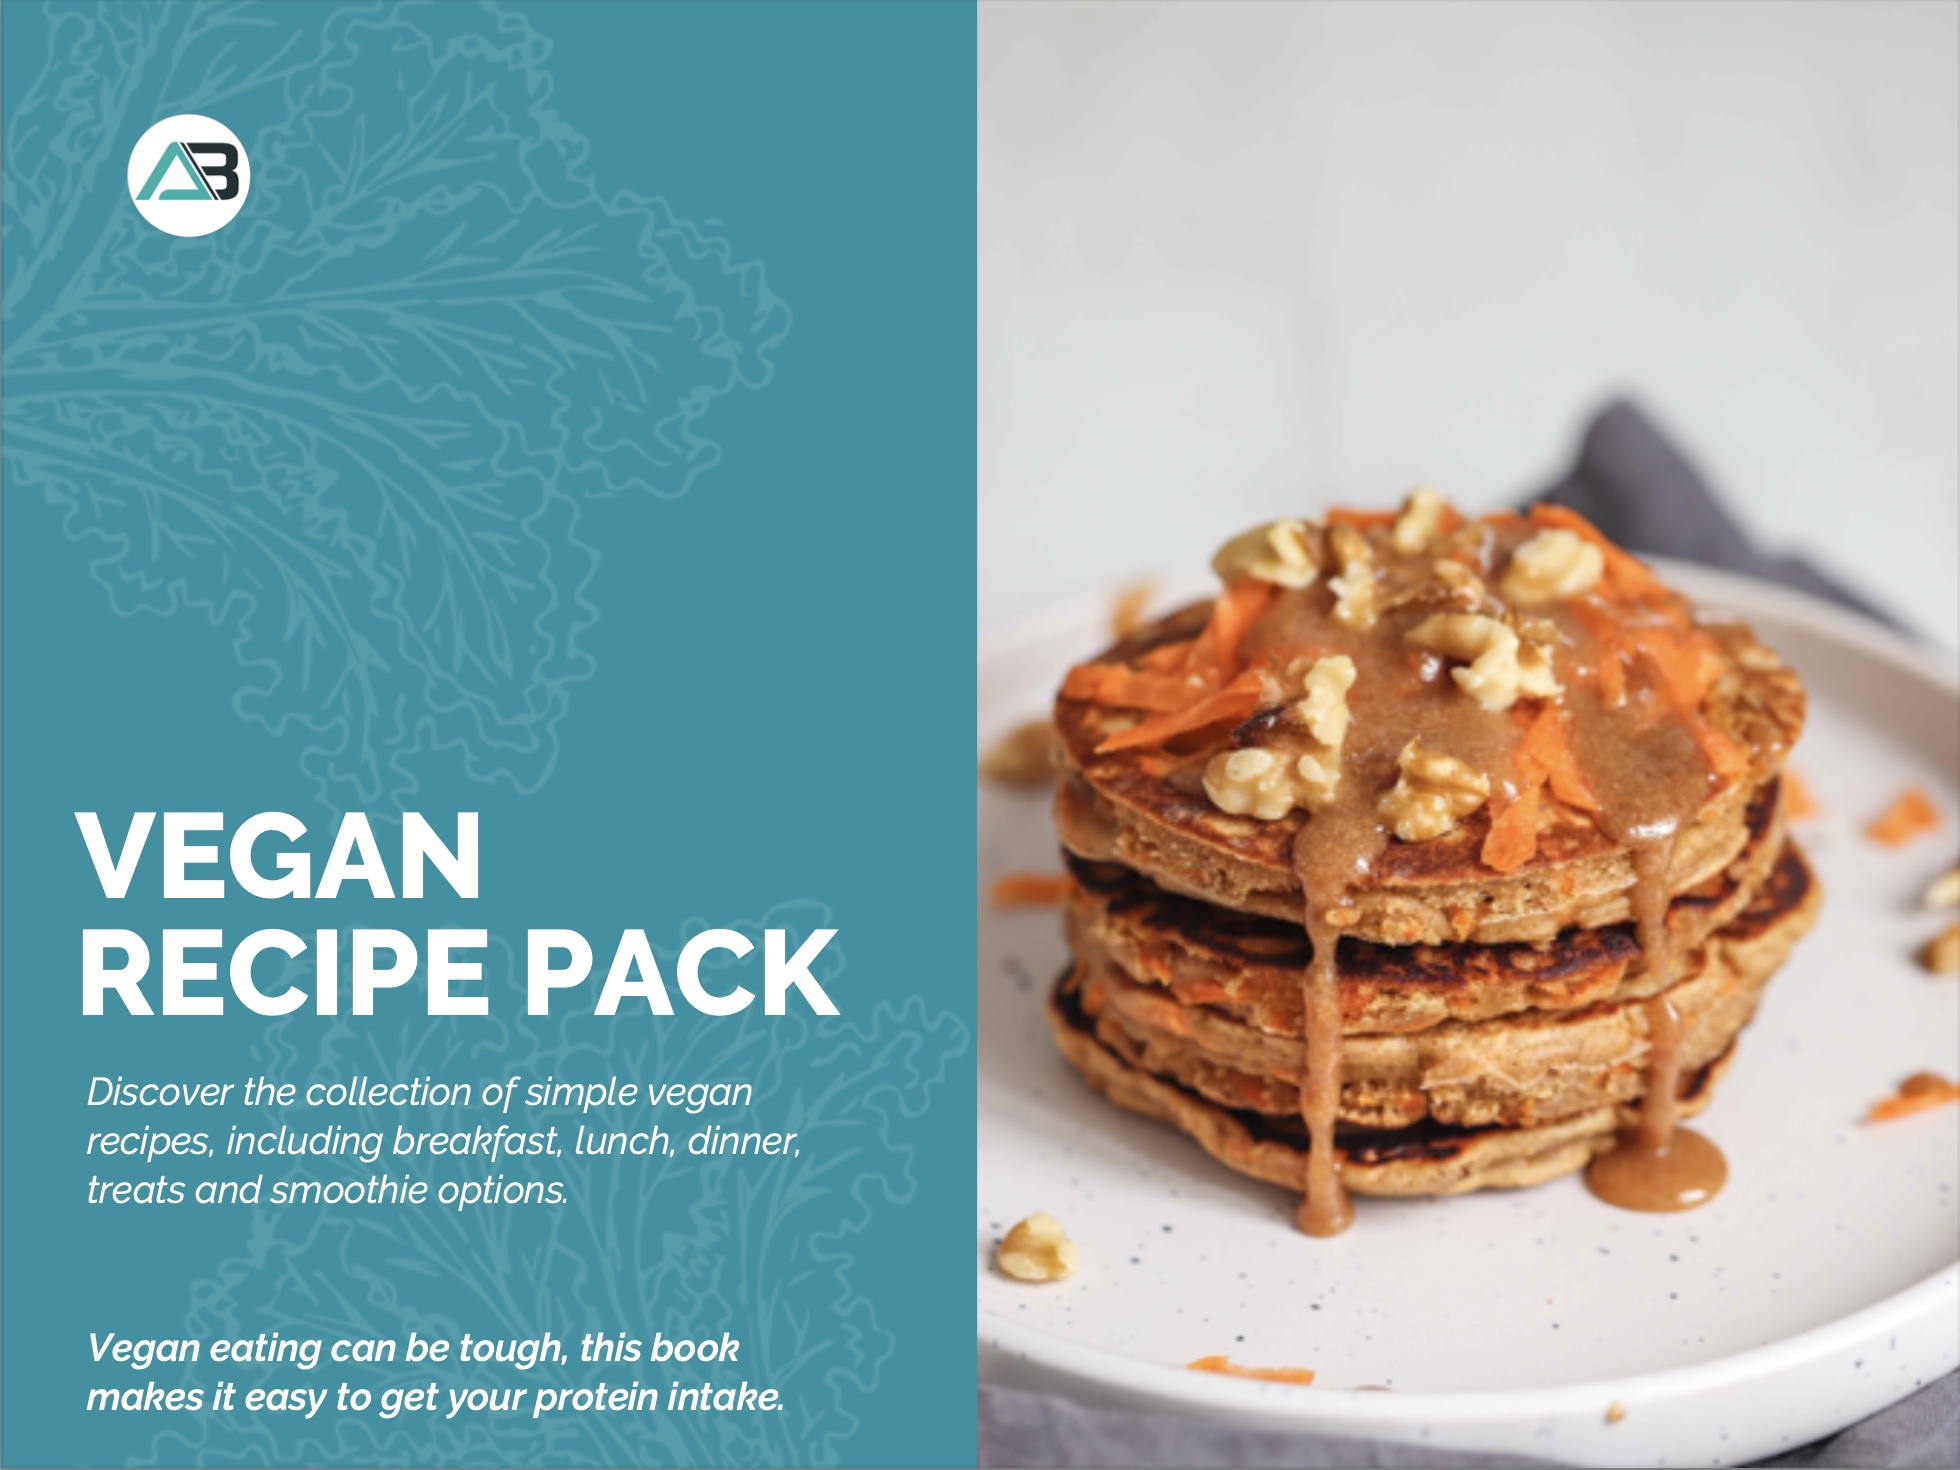 Vegan Recipe Pack front cover | Featured Image for Recipe Packs page by AB Fitness Hub.